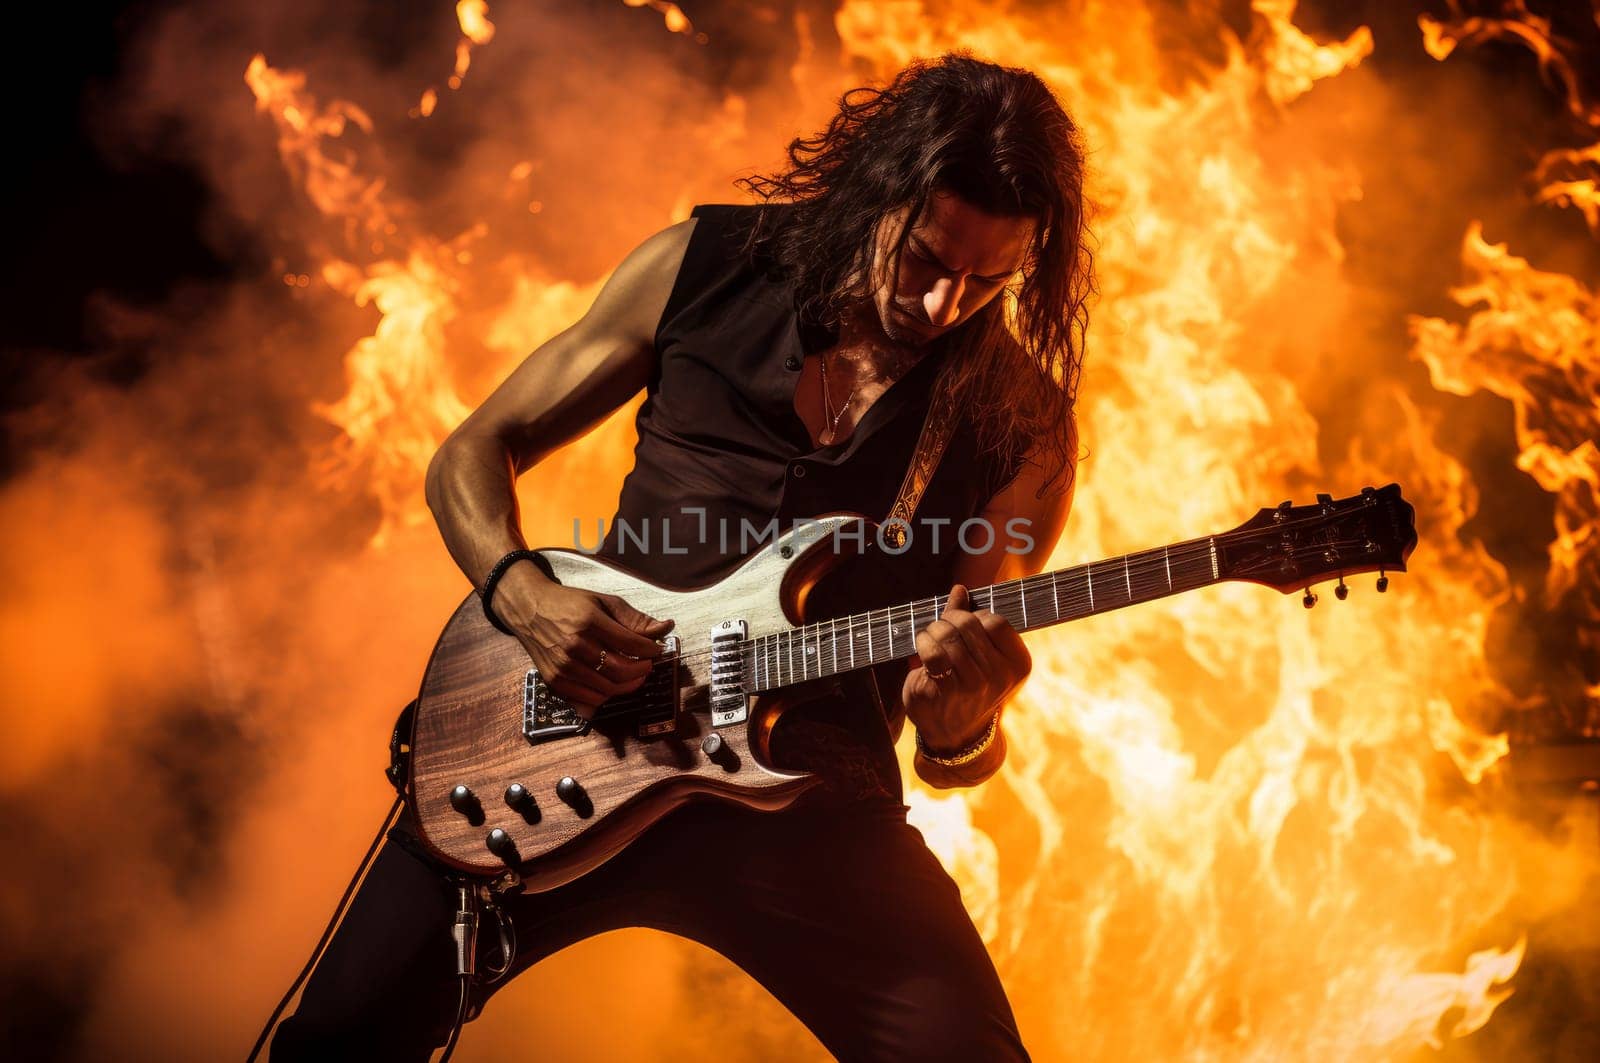 Blazing Guitarist take on fire. Rock stage music by ylivdesign